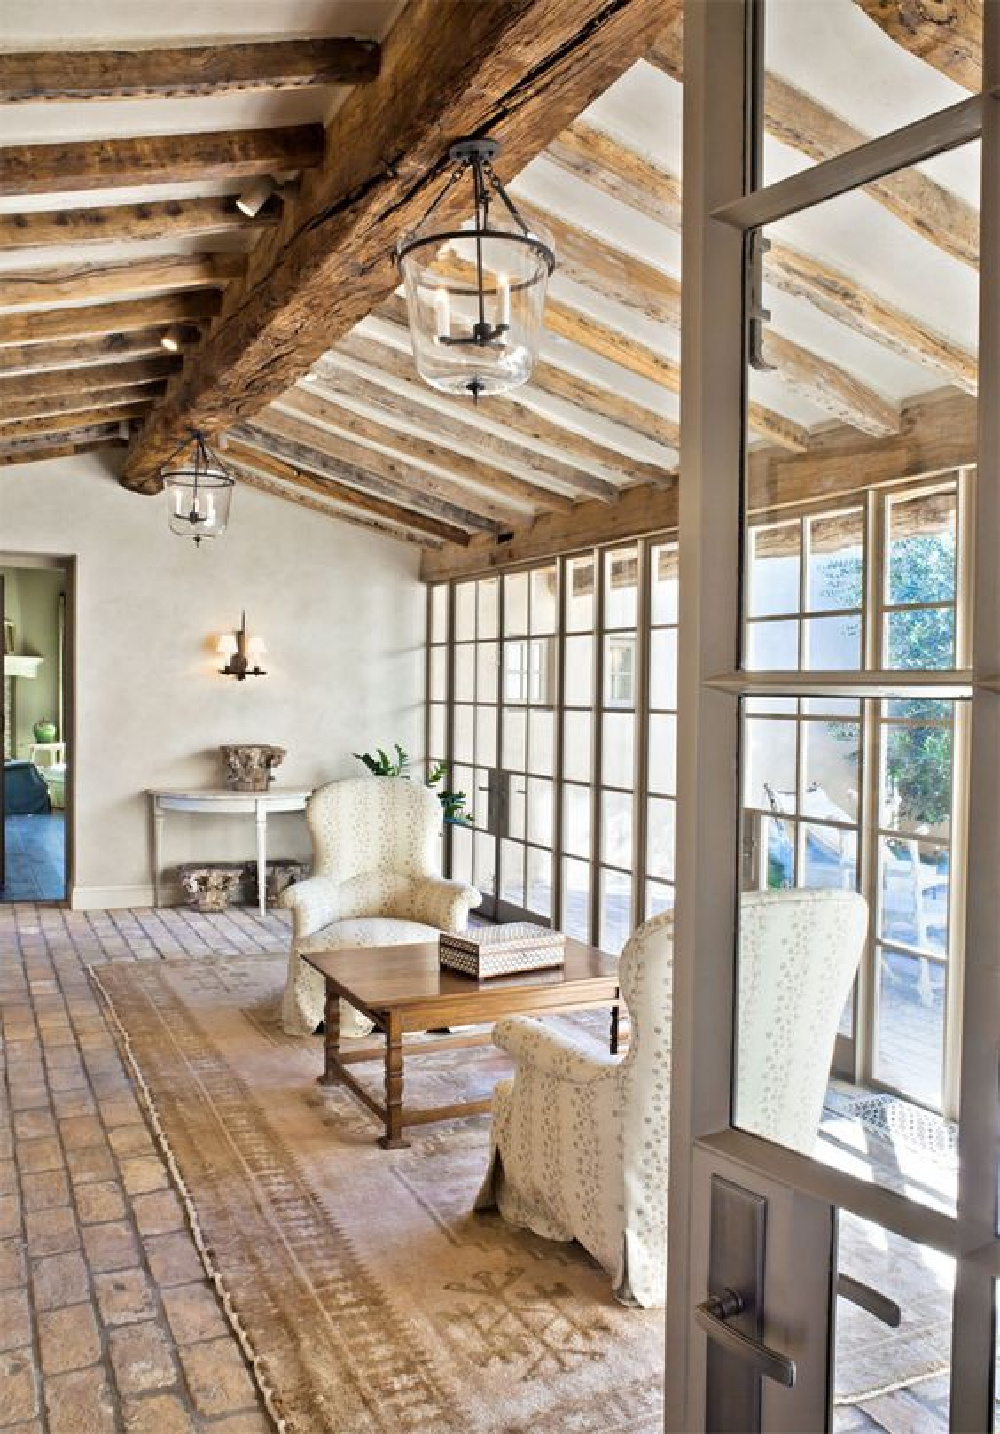 Rustic aged wood ceiling beams, brick flooring and walls of glass in a masterfully designed European country home - Oz Architects.